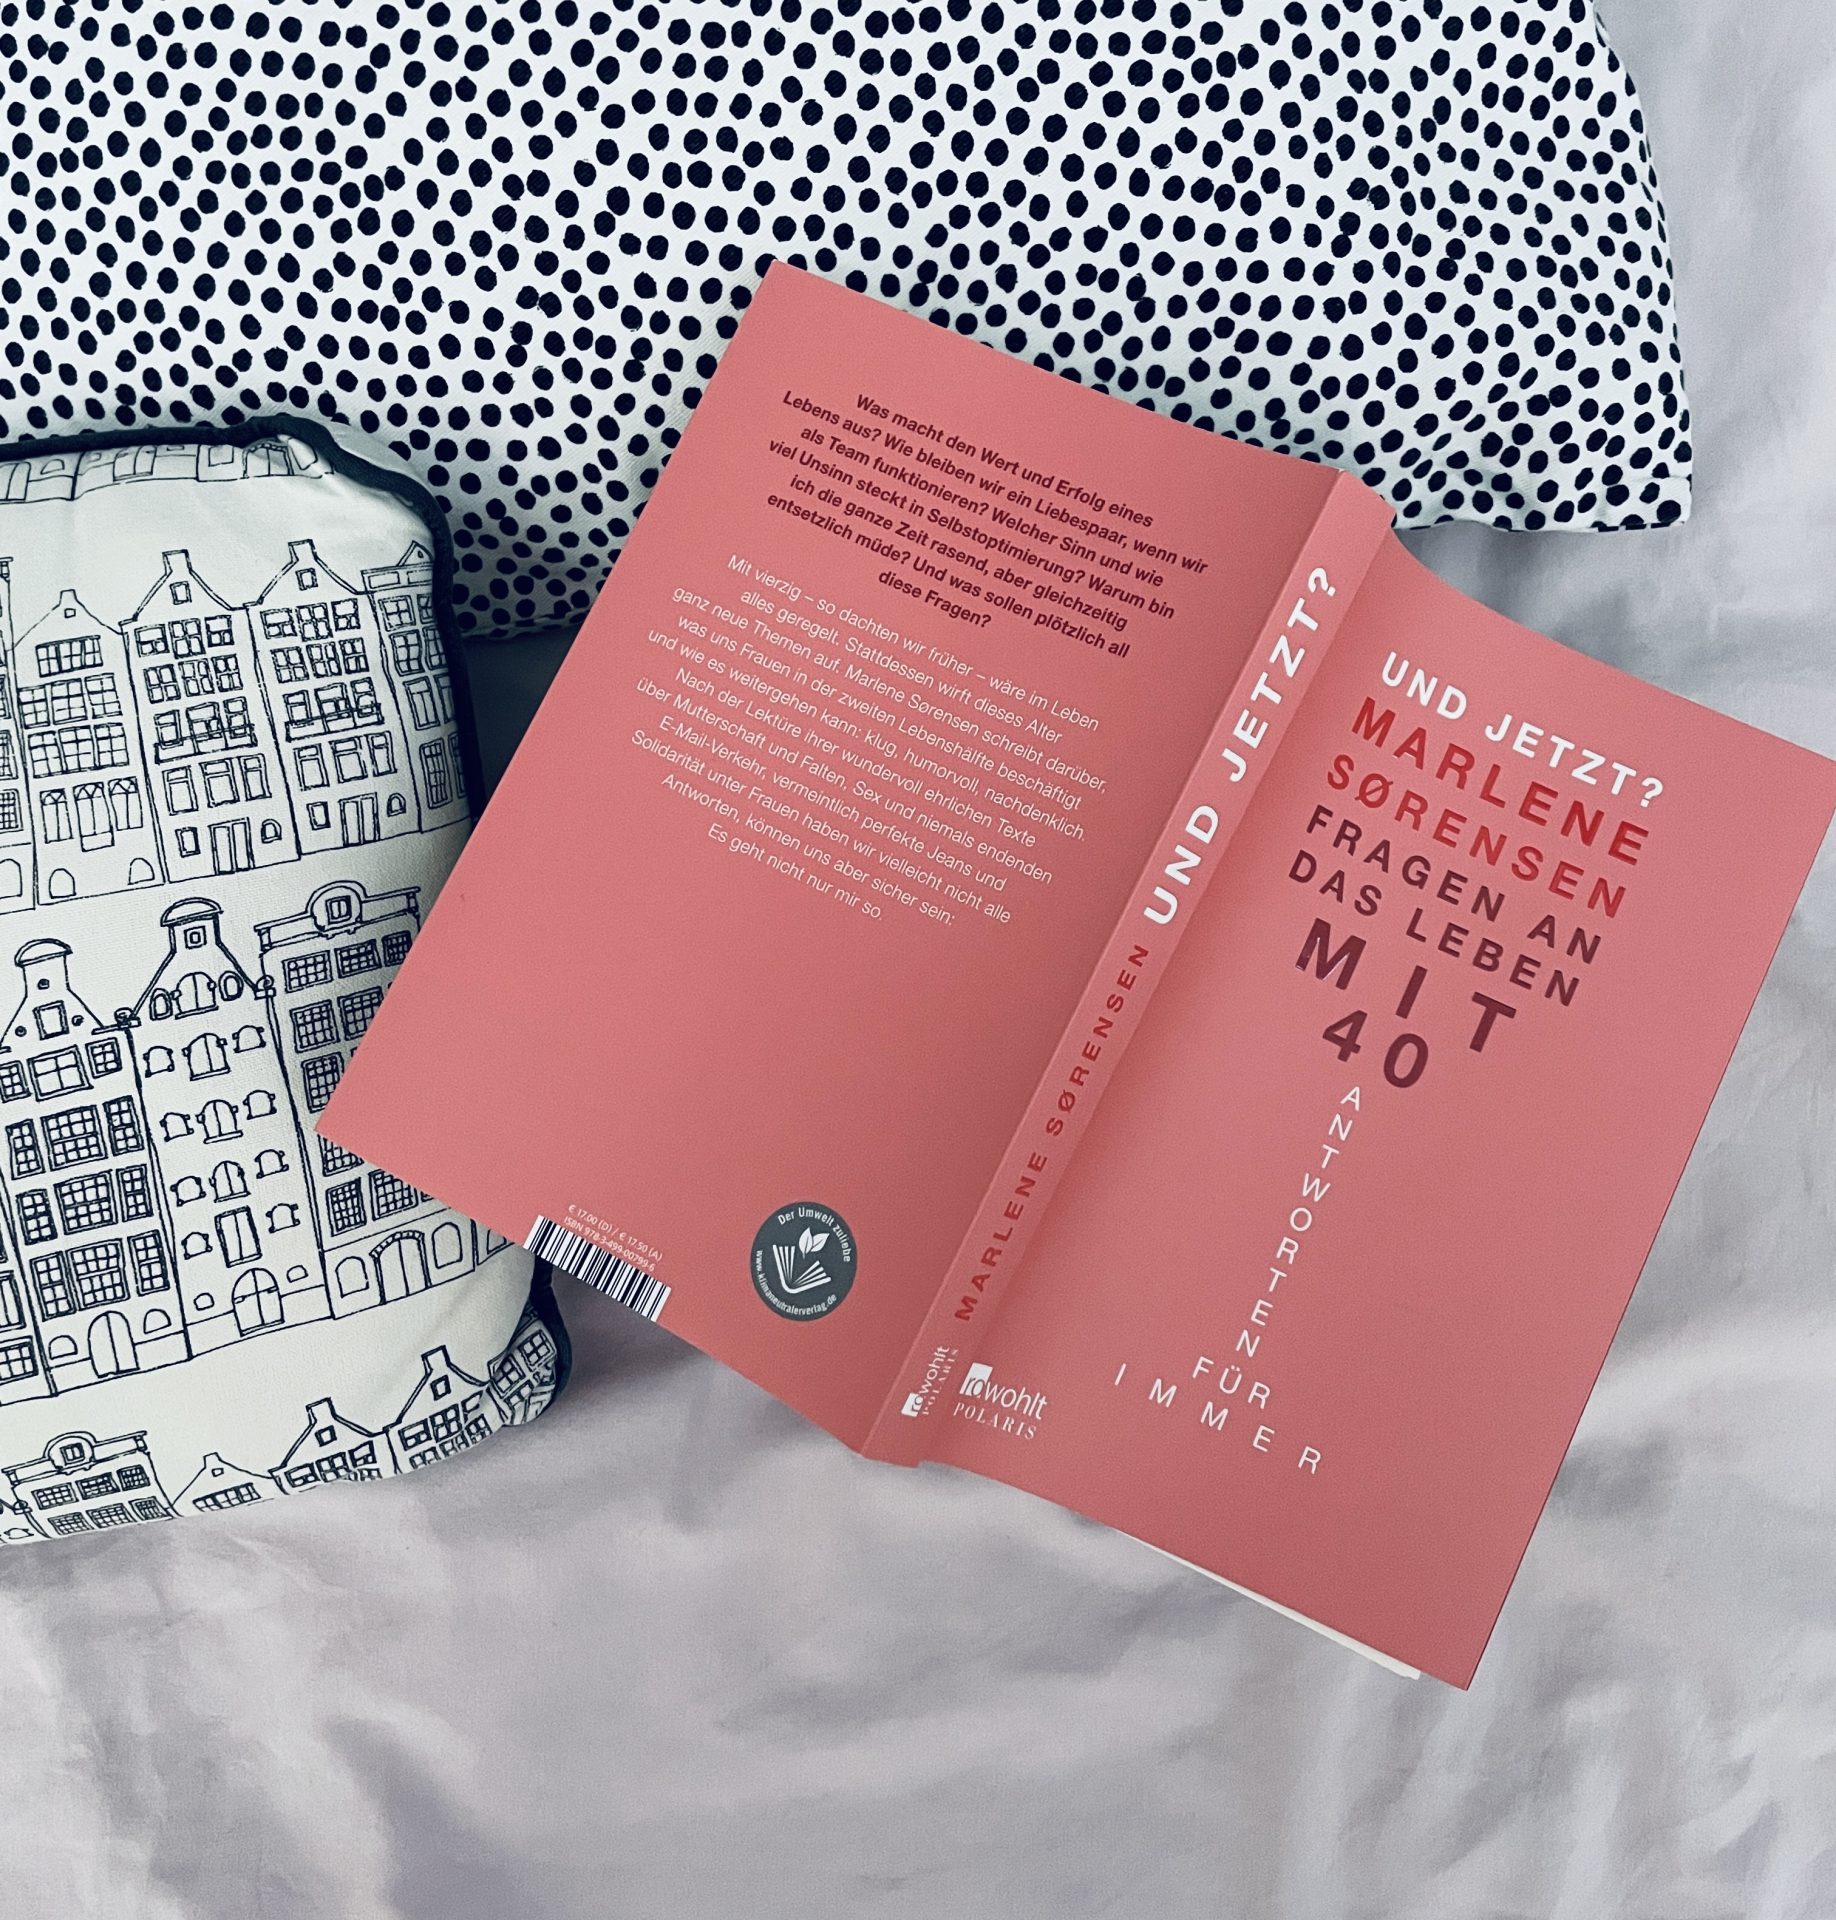 4 Books On My TBR Pile I Finally Want to Read | The Menzini Files